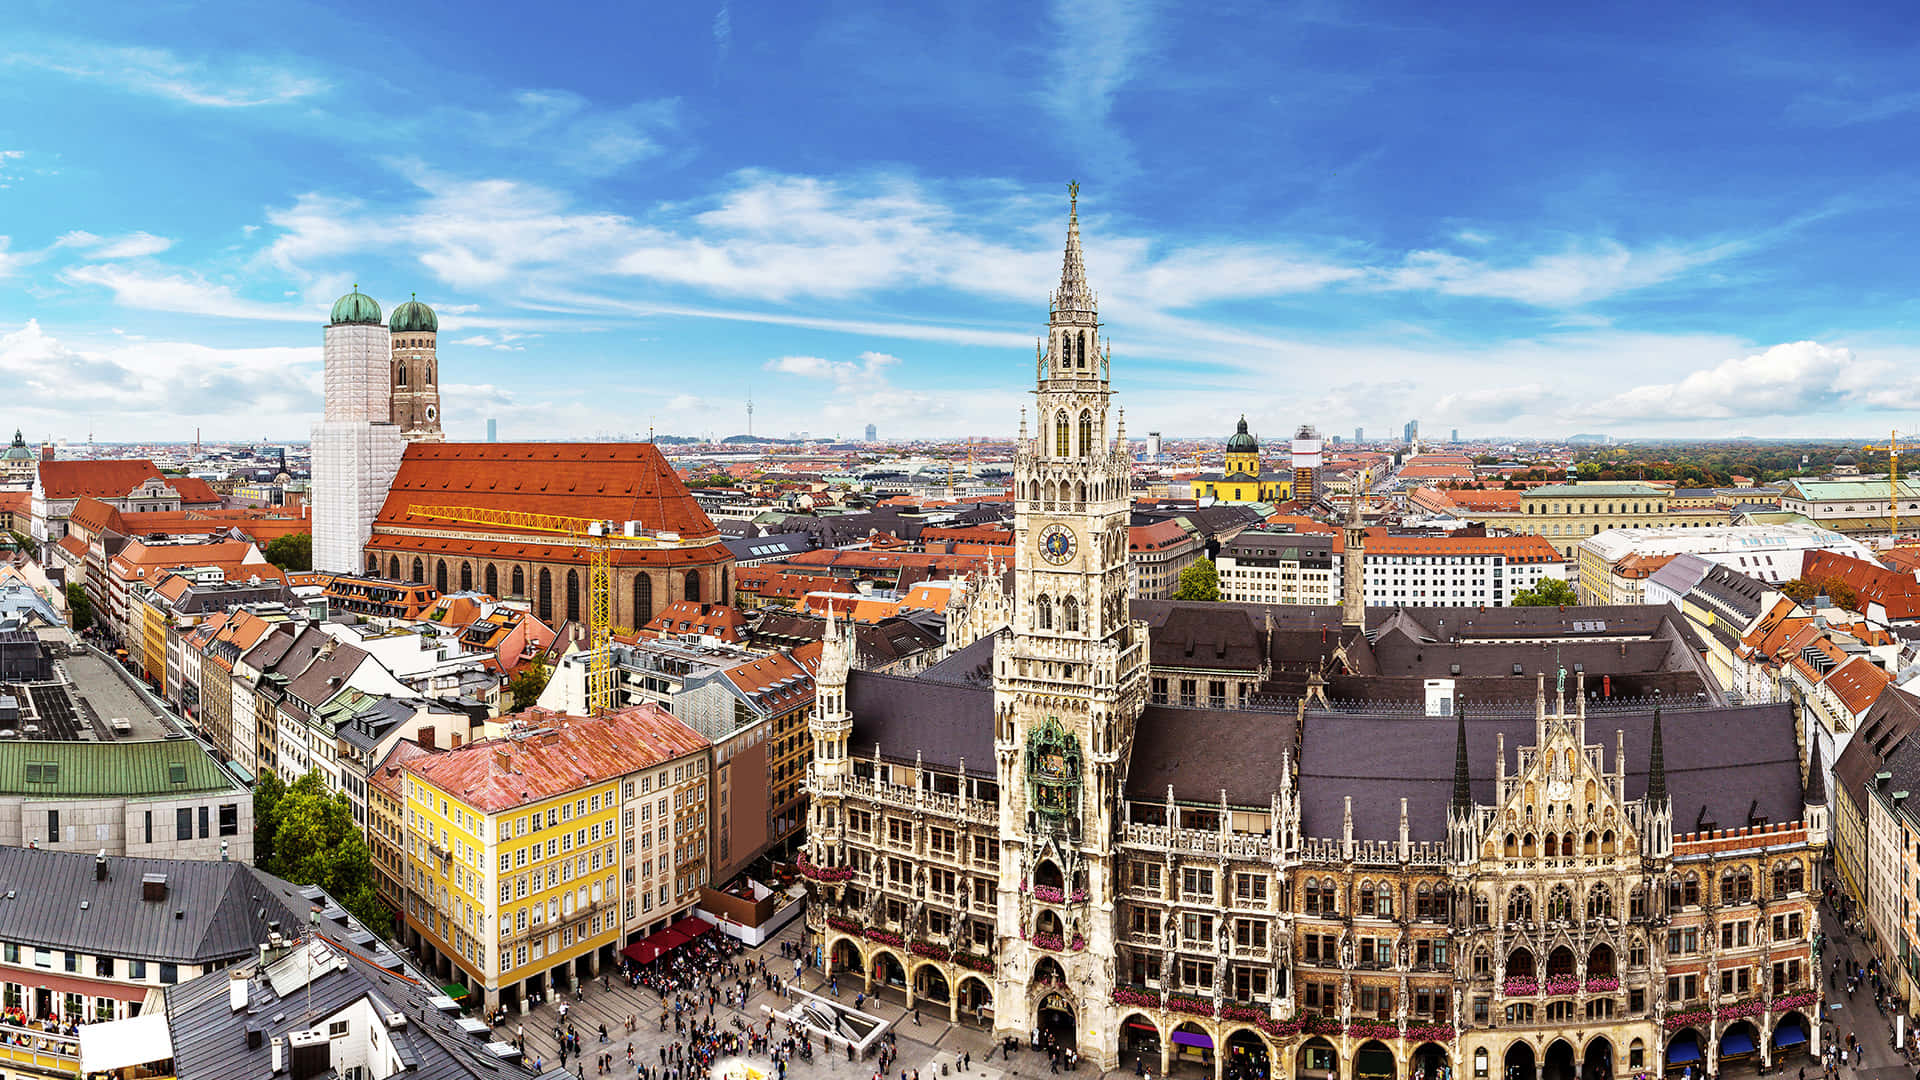 "marienplatz Bustling With People On A Sunny Day In Munich" Wallpaper